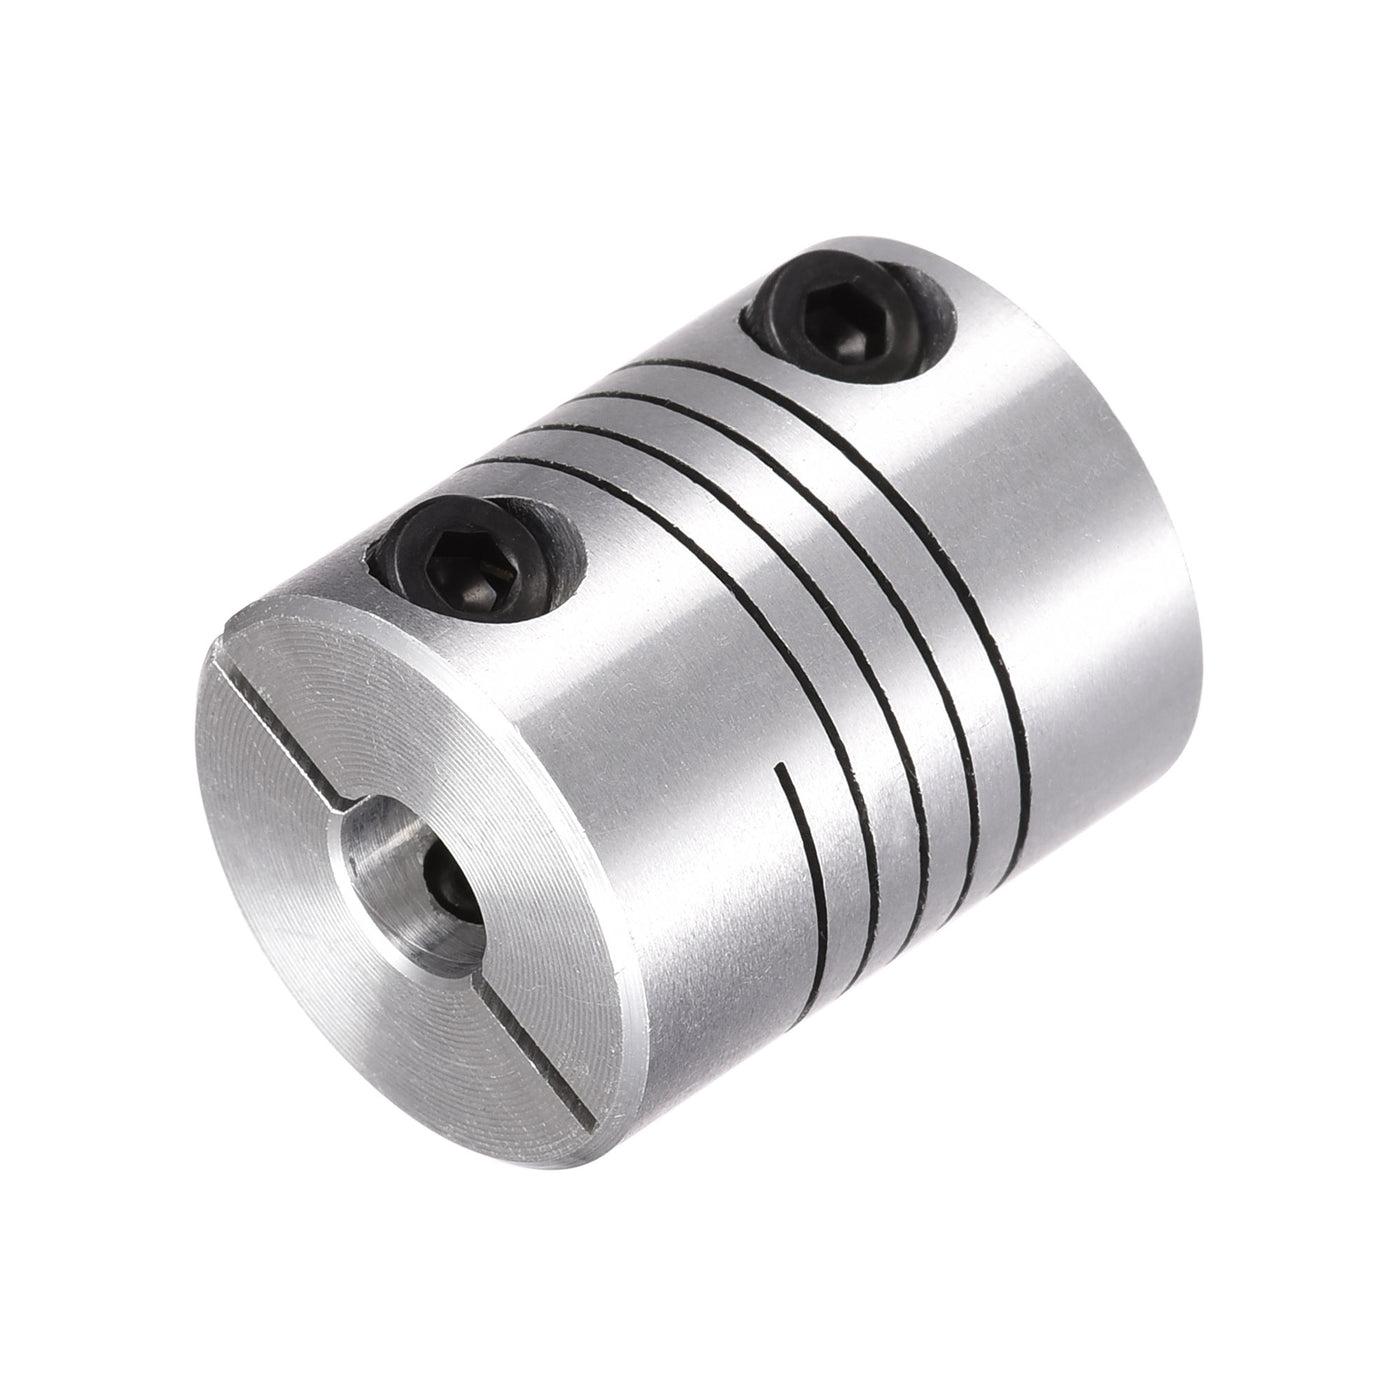 uxcell Uxcell 2PCS Motor Shaft 6mm to 8mm Helical Beam Coupler Coupling 20mm Dia 25mm Length